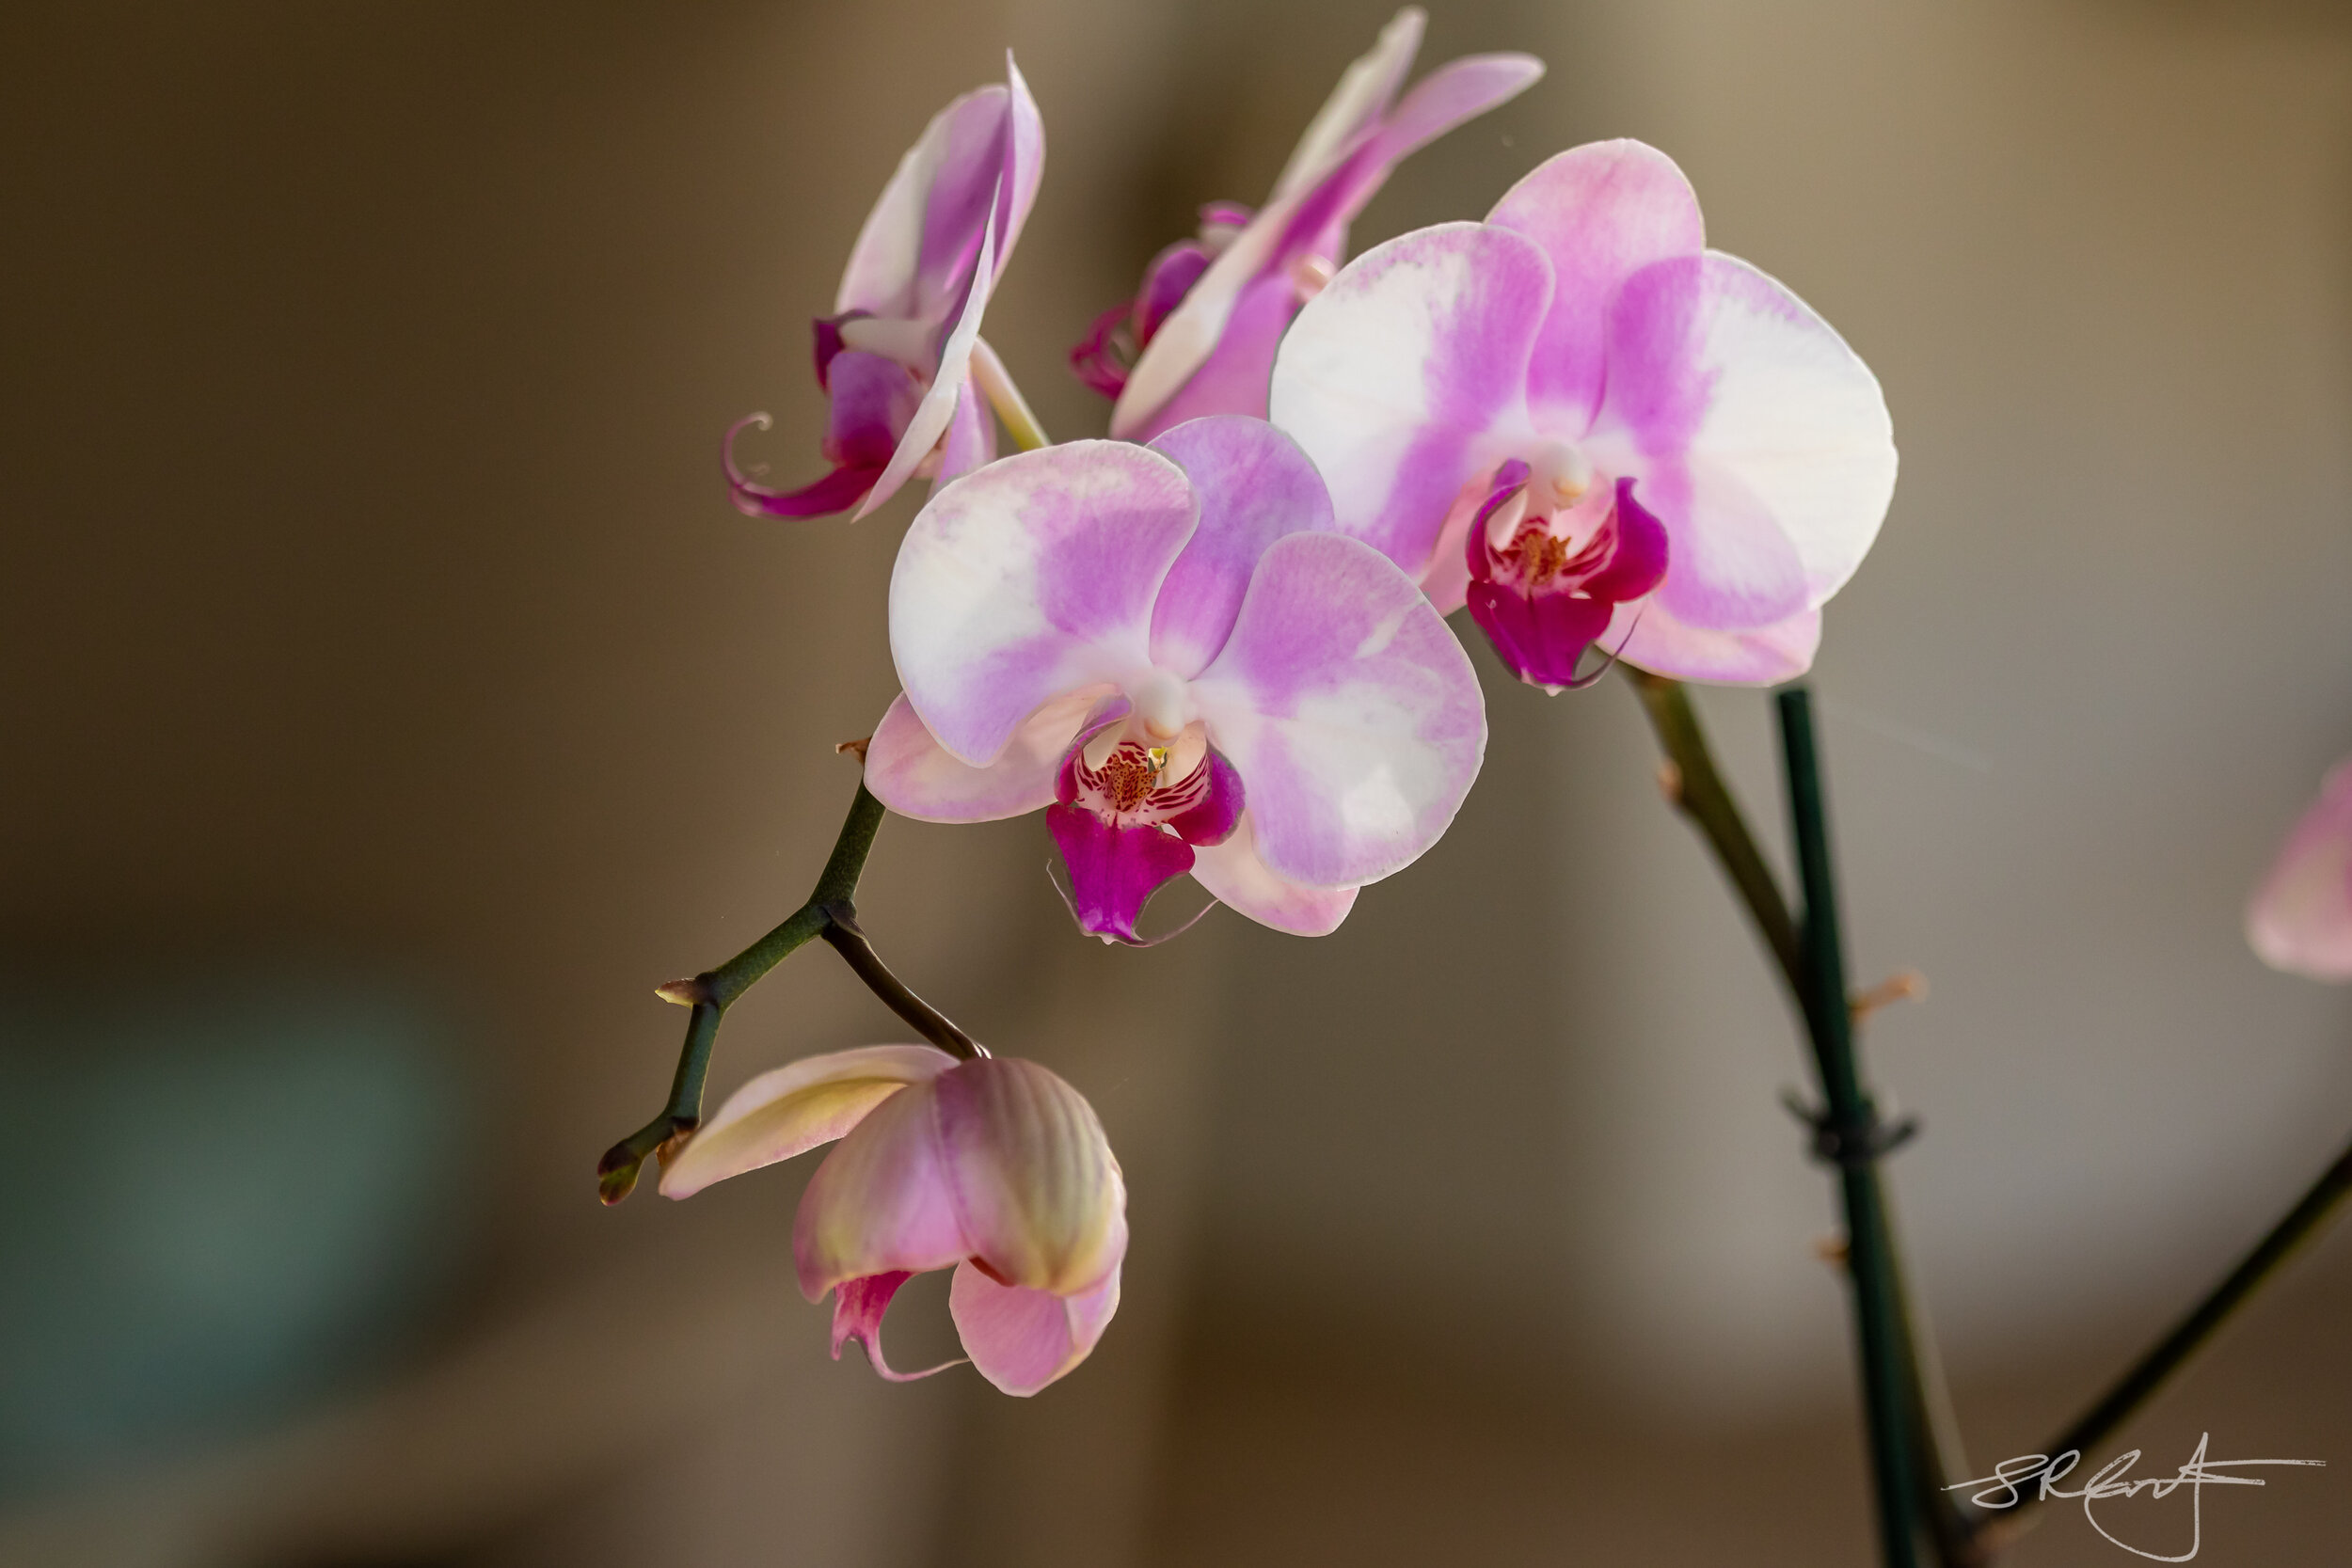 Classic Orchid, blooming away.